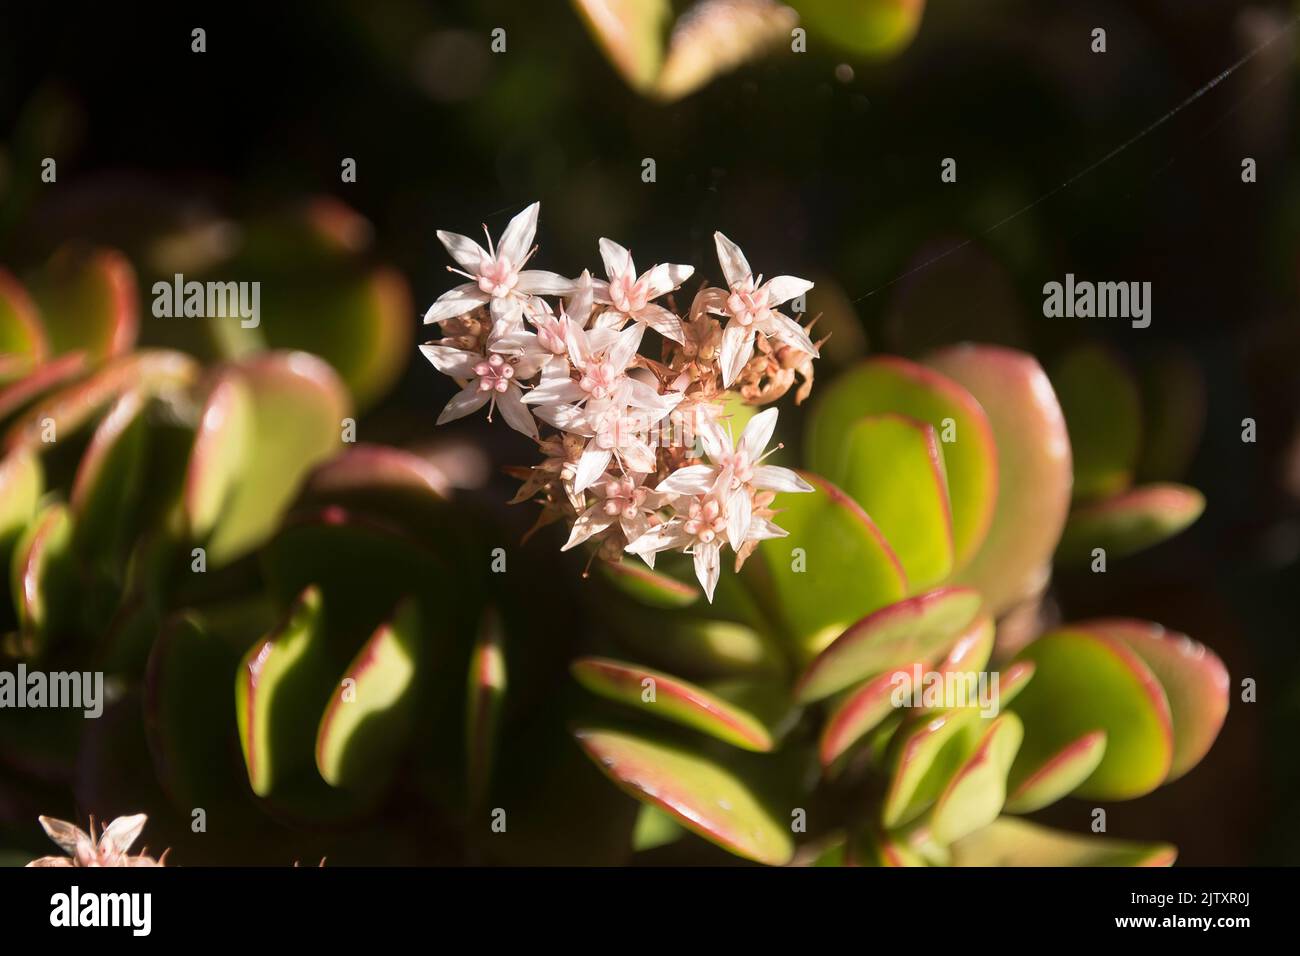 Small pink flowers of Jade plant (money plant), Crassula ovata Pink, succulent from South Africa, growing in Australian garden in Queensland. Stock Photo